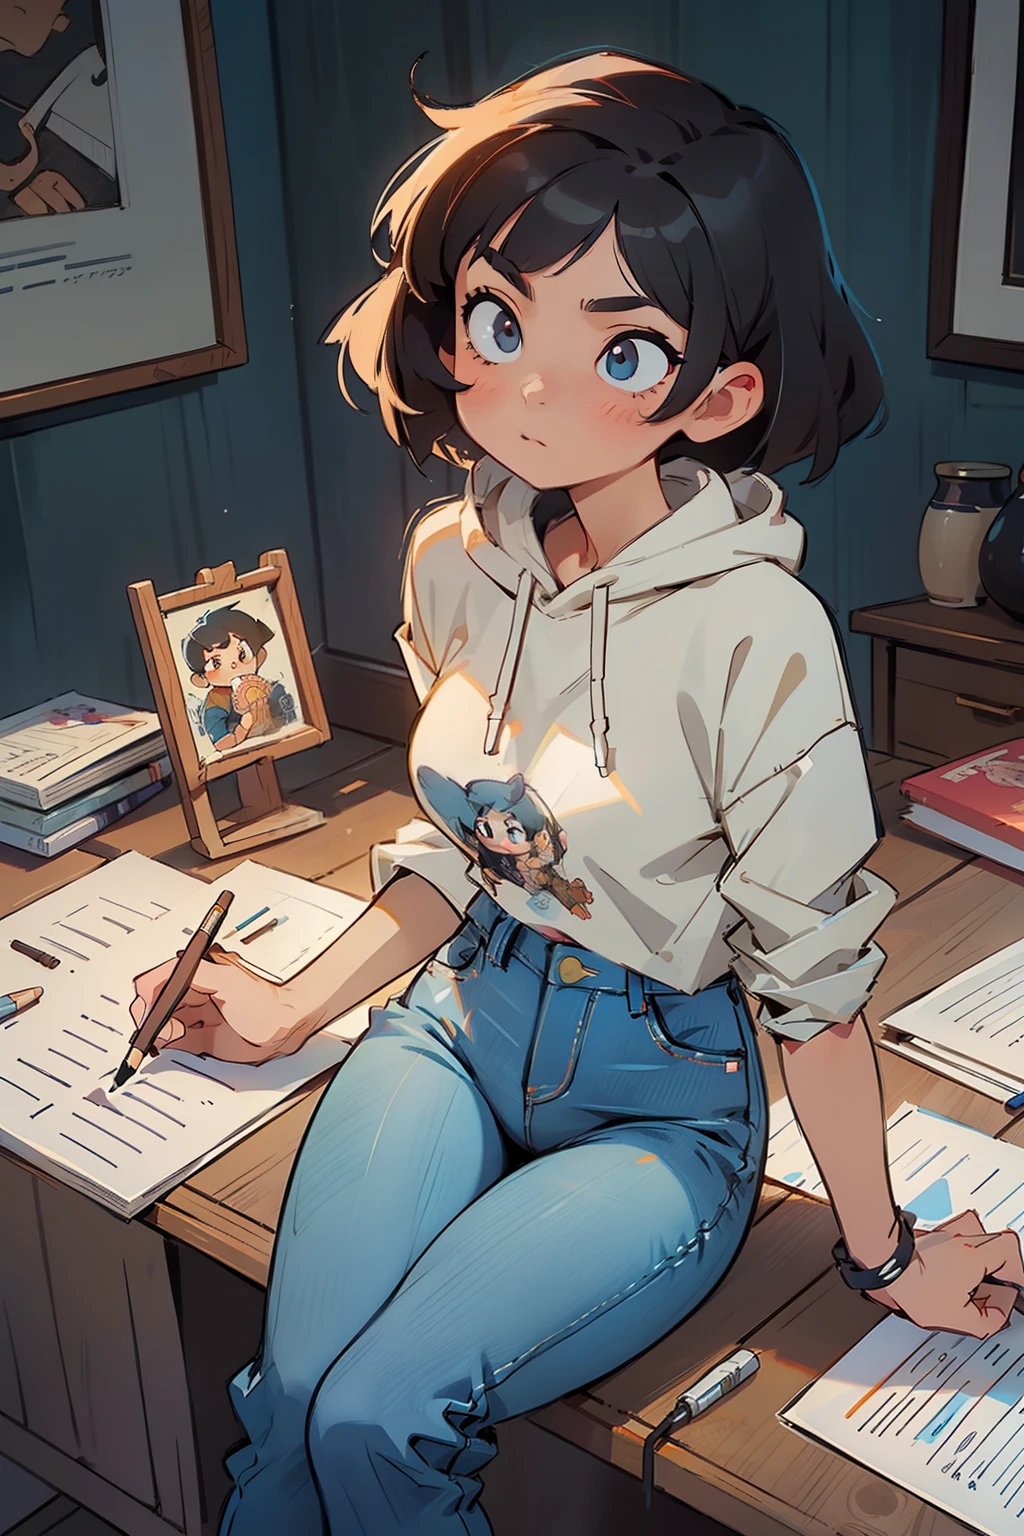 masterpiece, best quality, high detailed, concept art, (anime:0.55), (nsfw:0.25), sitting in chair, wolf cut hair style, short black hair, pretty eyes, plain clothes, normal clothing, cowboy shot, pretty, very pretty, beautiful lighting, pretty girl, big breasts, thick thighs, tiny waist, white, asian, Caucasian, light skin, deep in thought, dynamic angle, perspective, head down in thought, focusing on drawing, pants, jeans, shirt, hoodie, holding pencil, looking down, artist, artist drawing, drawing artist, artist girl drawing something